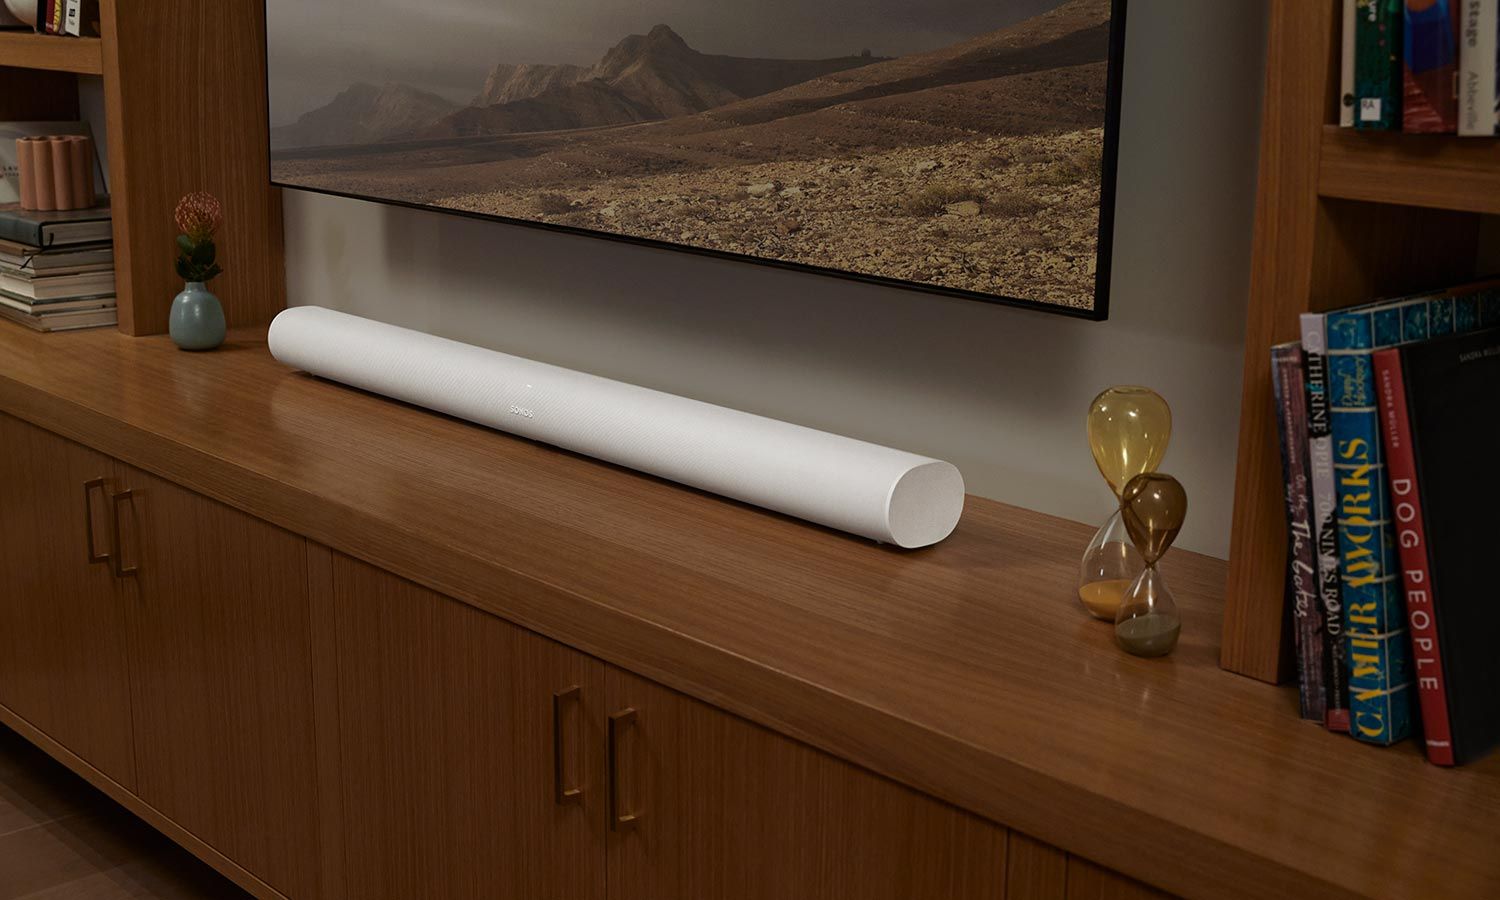 Sonos soundbar placed on a wooden cabinet beneath a mounted TV, delivering high-quality audio.